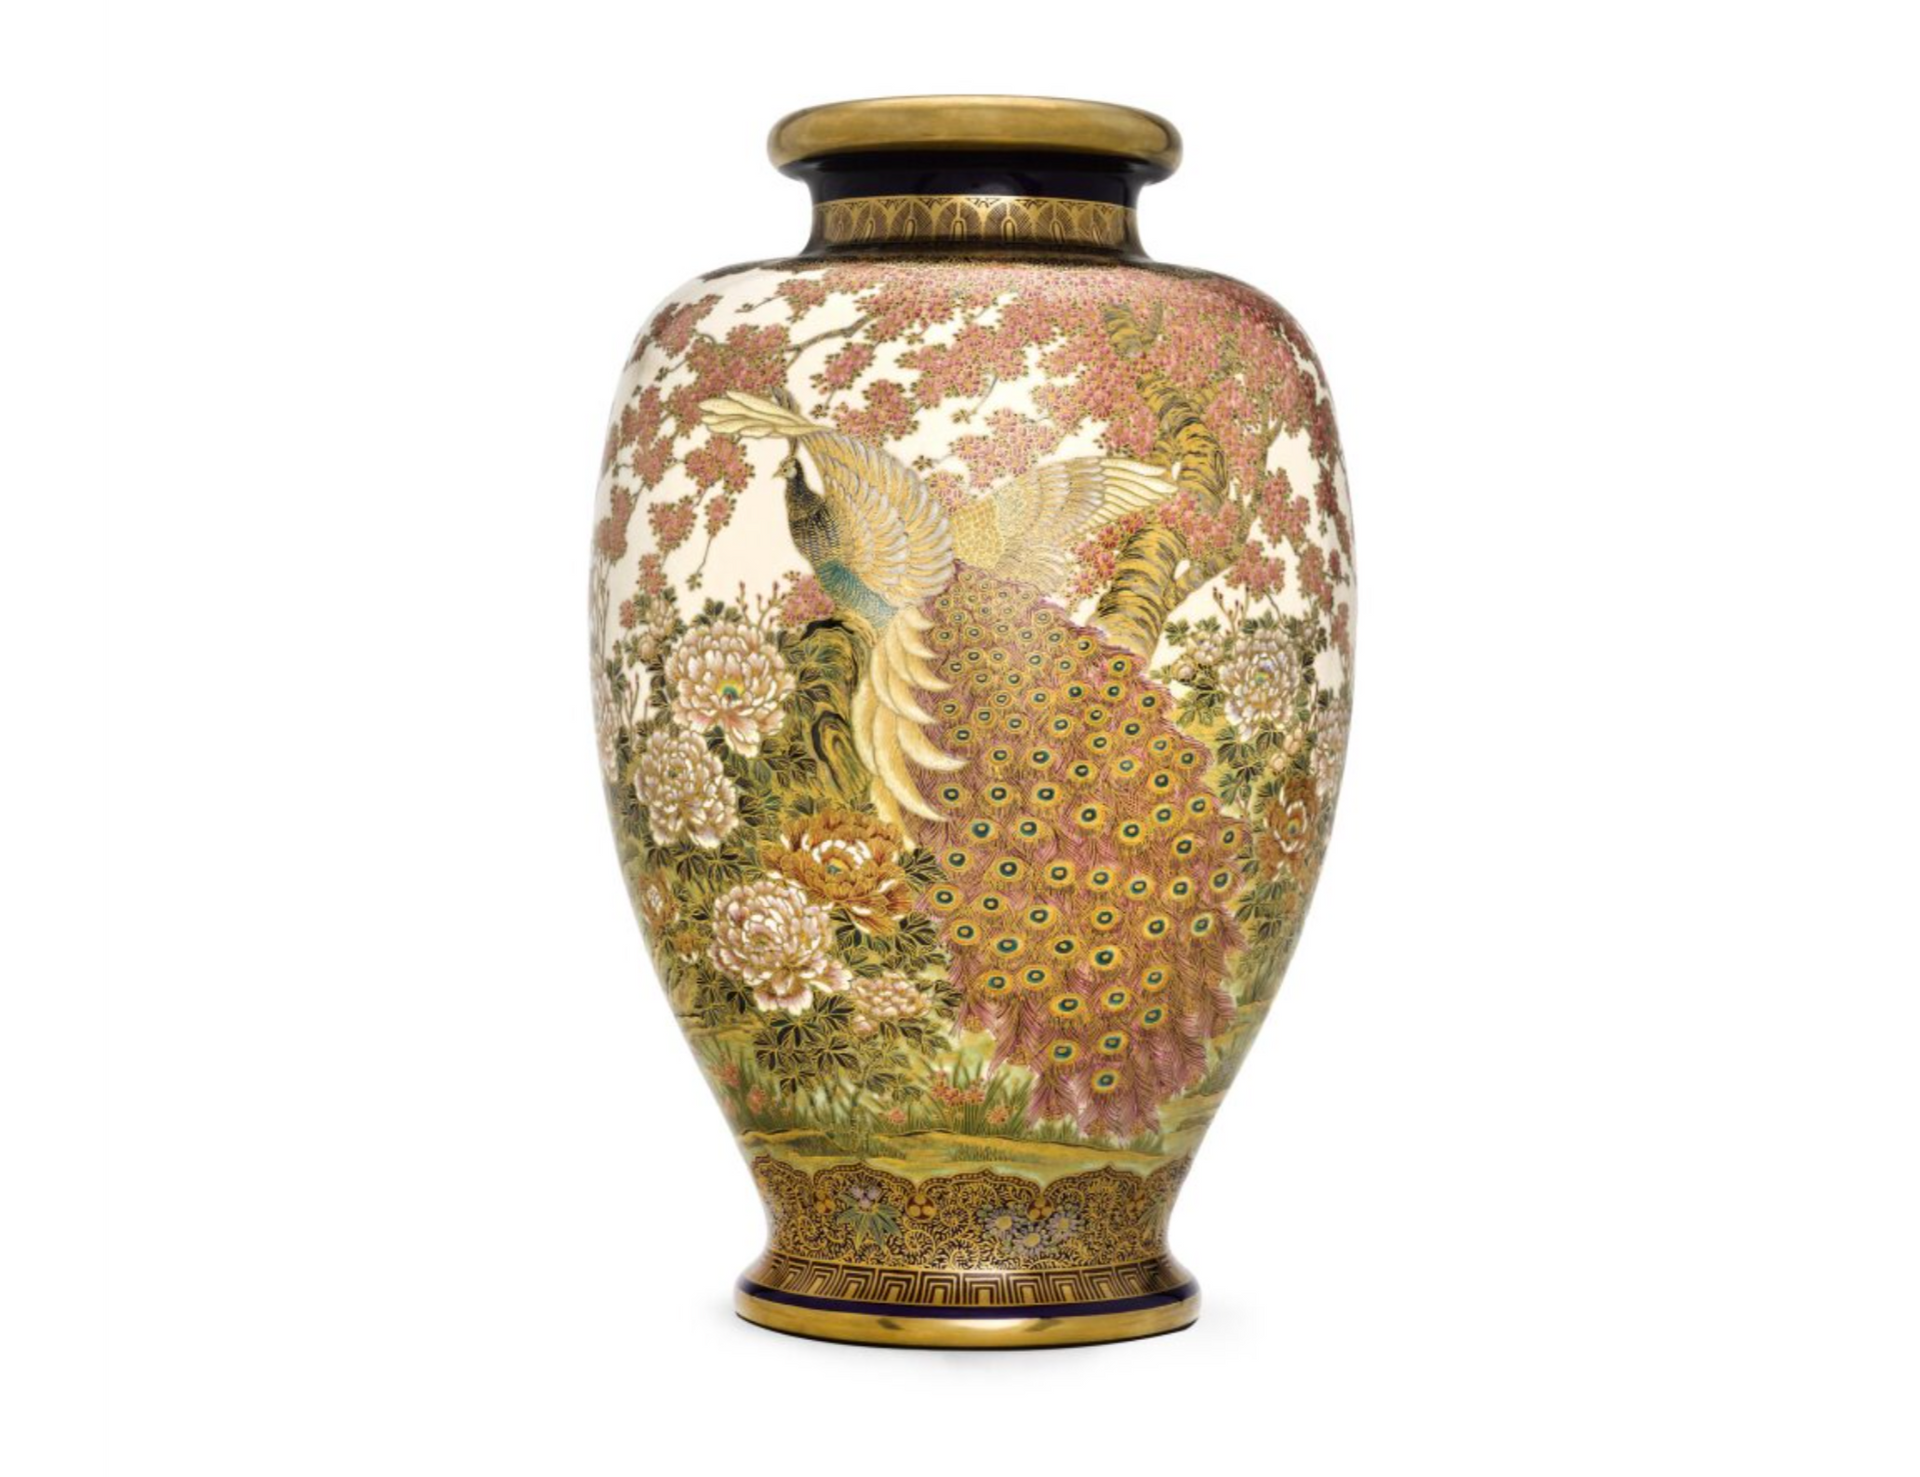 A tall oviform vase with everted foot and neck, decorated in various coloured enamels and gilt on a royal blue ground, with a peacock among peonies and plum blossoms beside a stream.